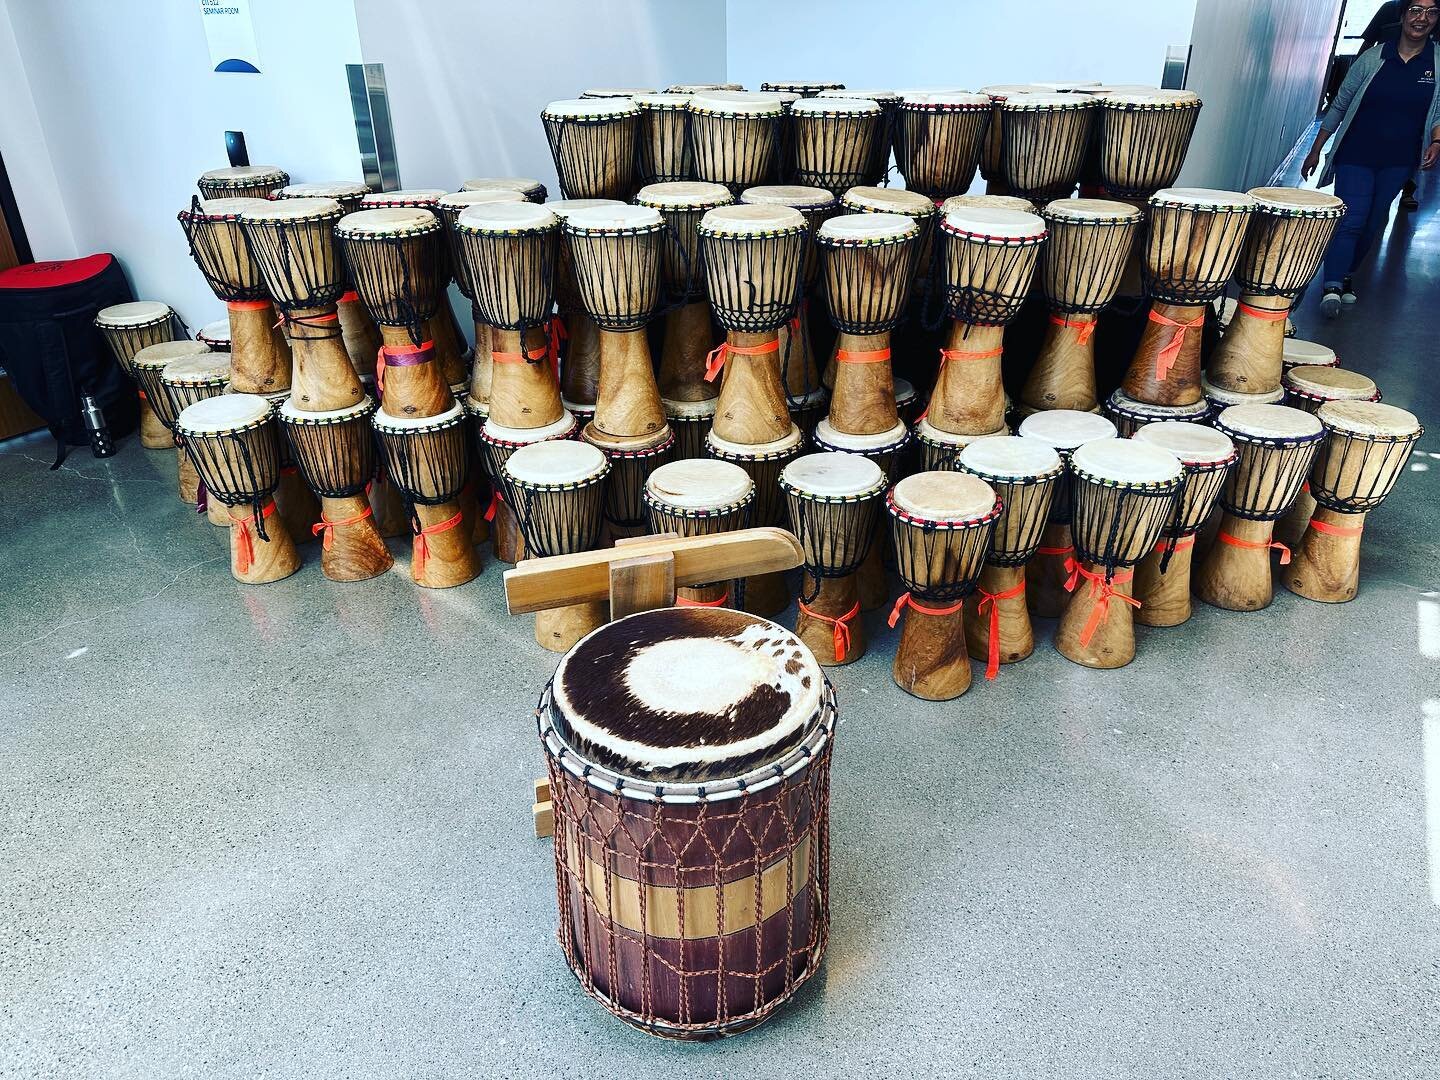 Drum circle djembe session with Humber ITS. ❤️ #djembe #drums #drumcircle #humbercollege